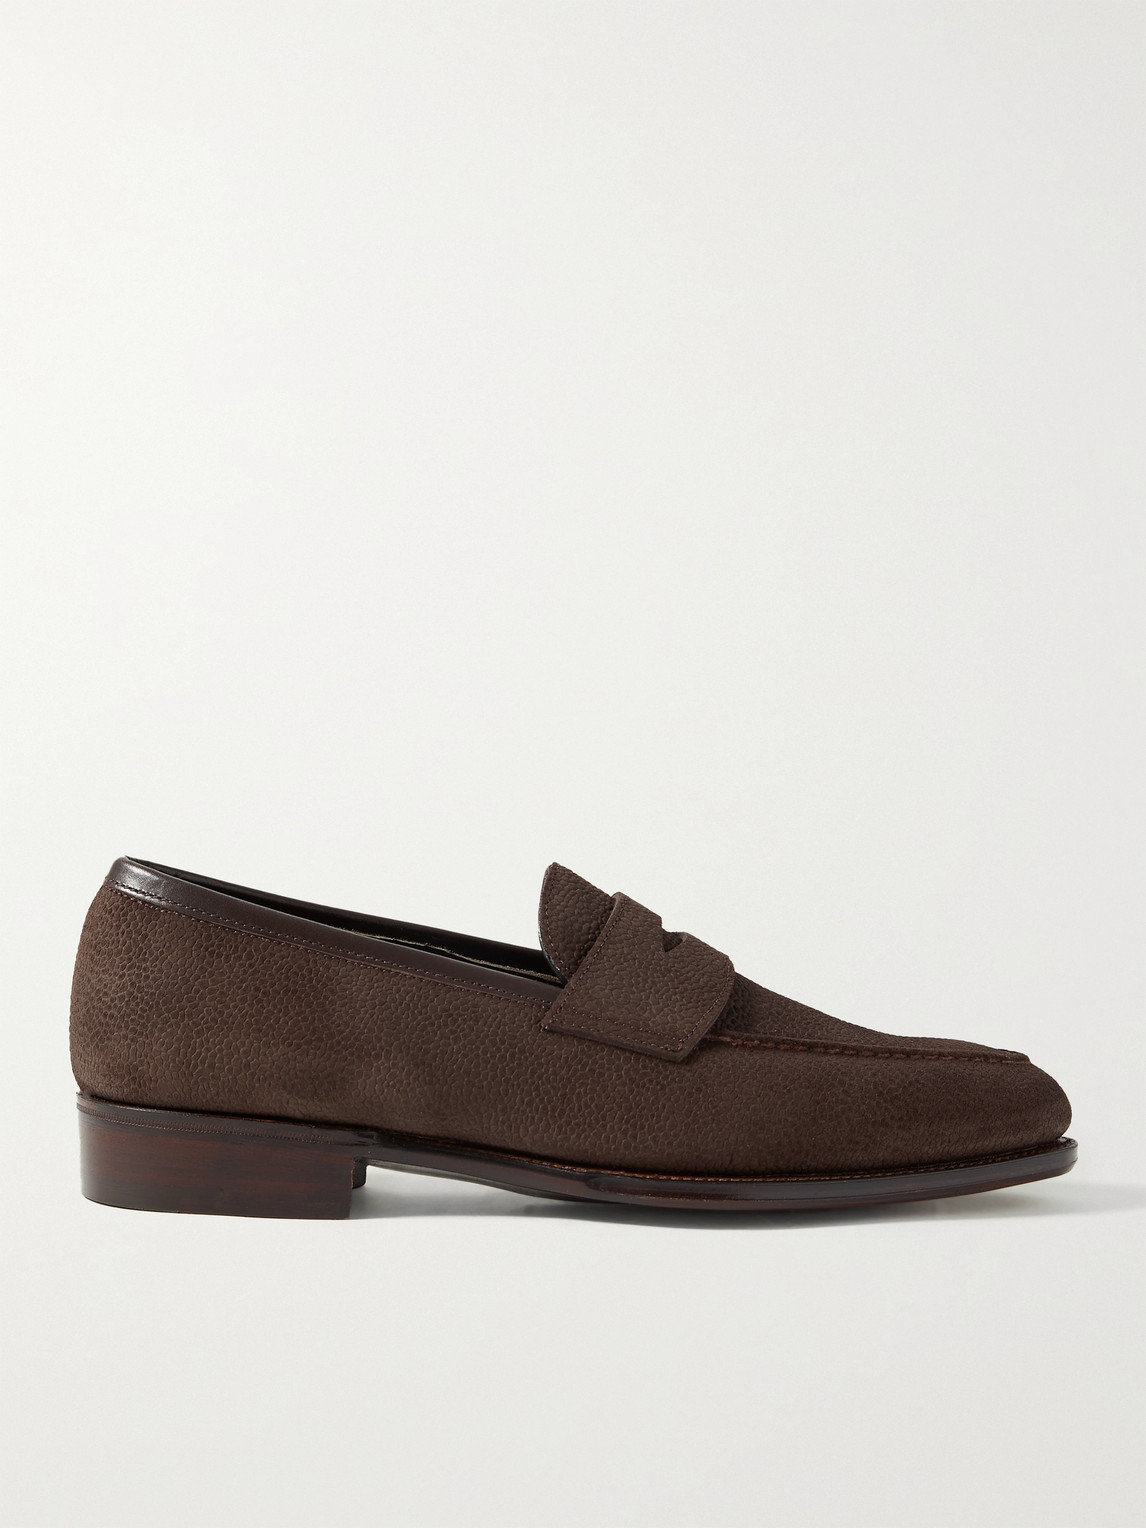 George Cleverley Bradley Iii Leather-trimmed Pebble-grain Suede Penny Loafers In Brown